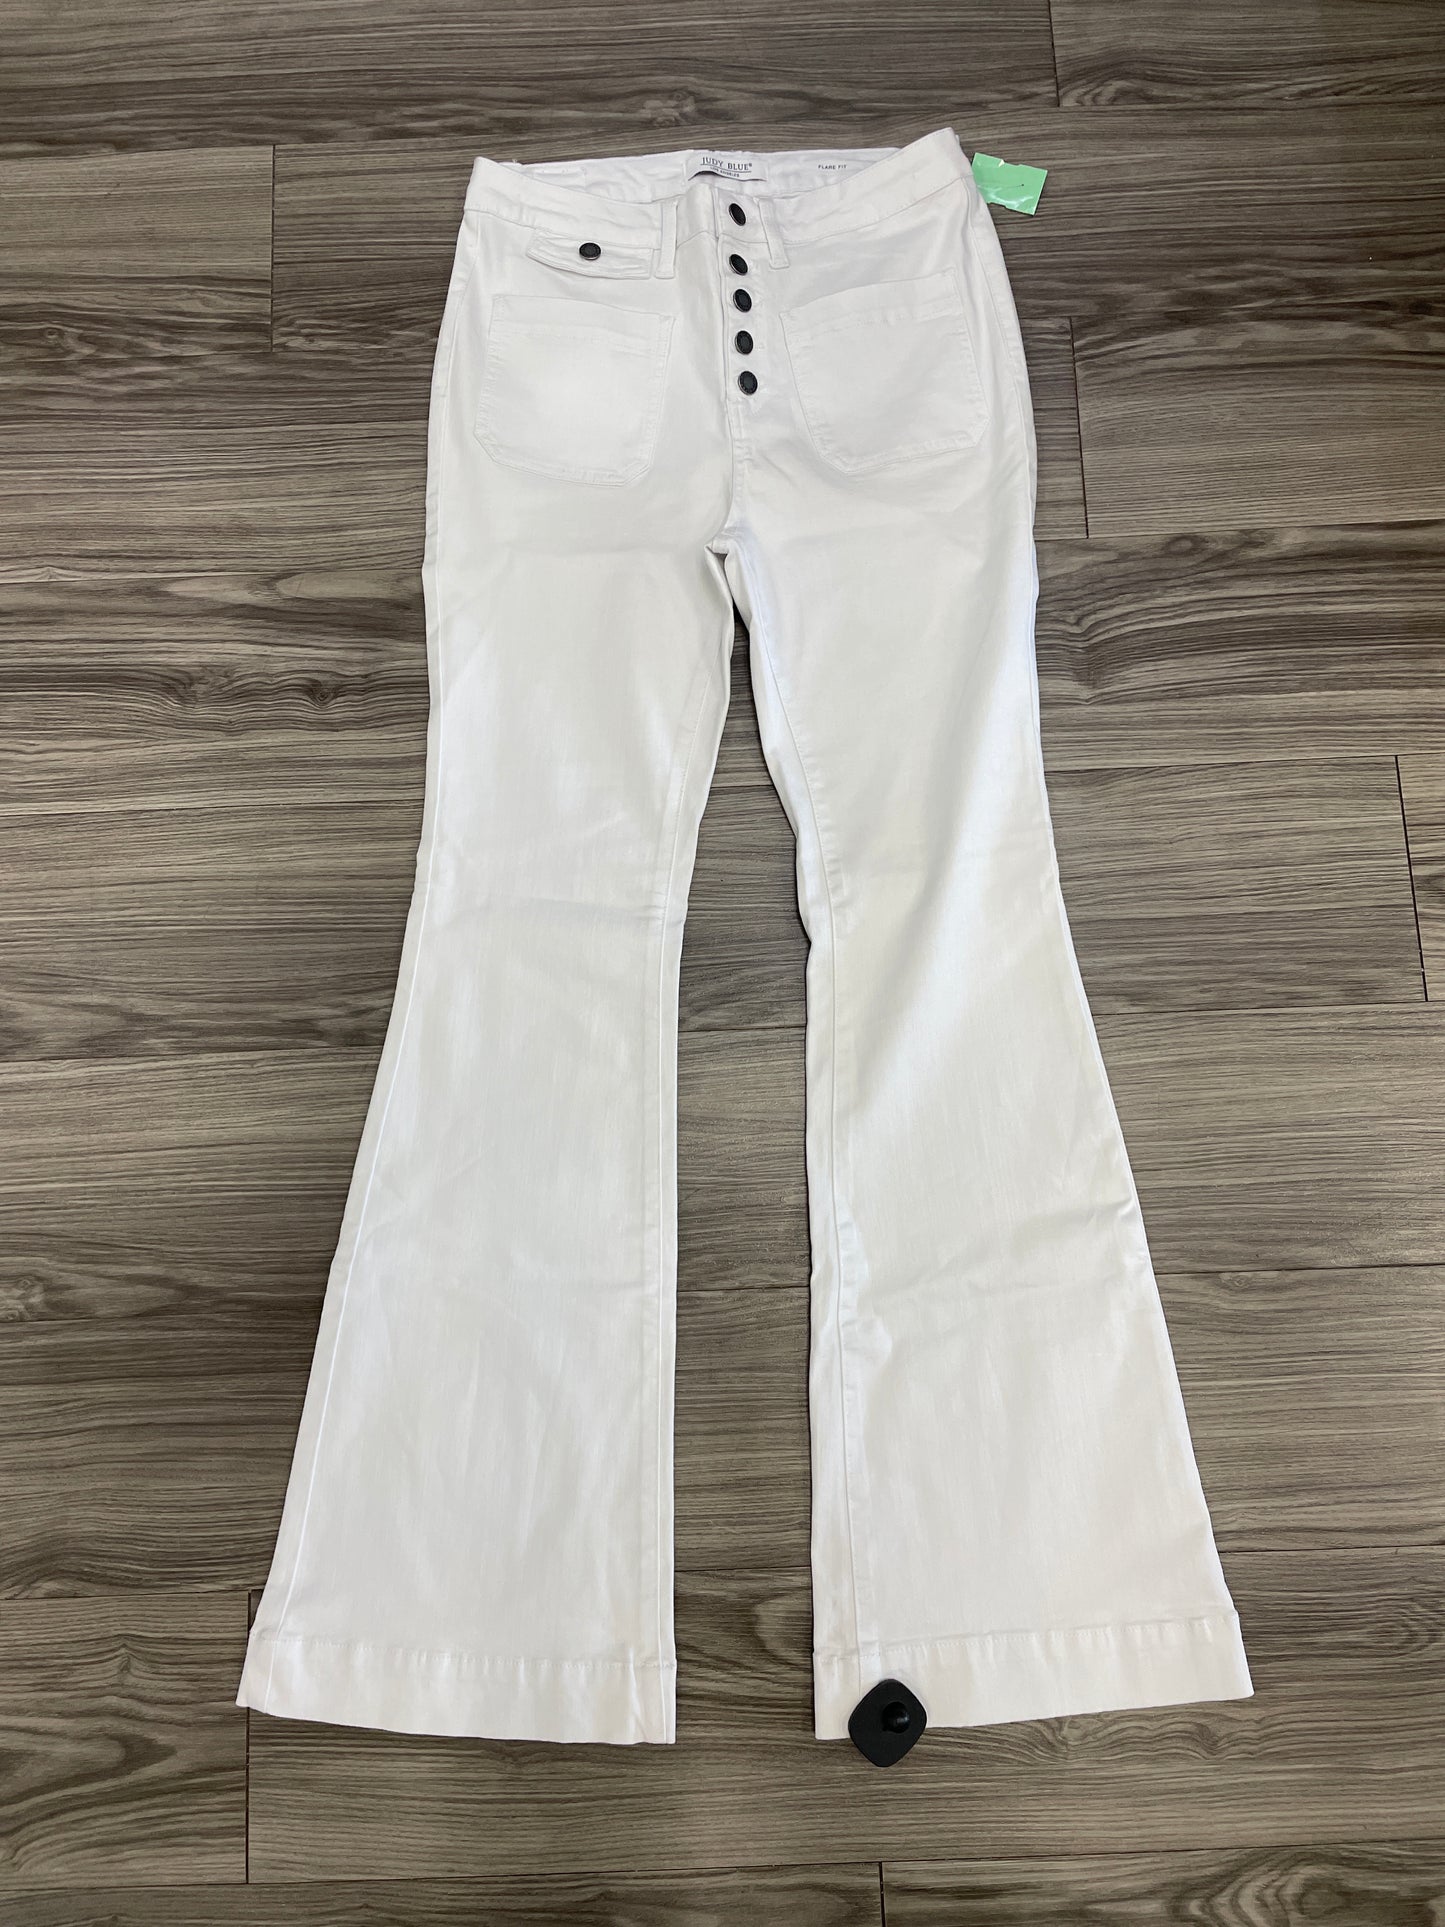 White Jeans Boot Cut Judy Blue, Size 8